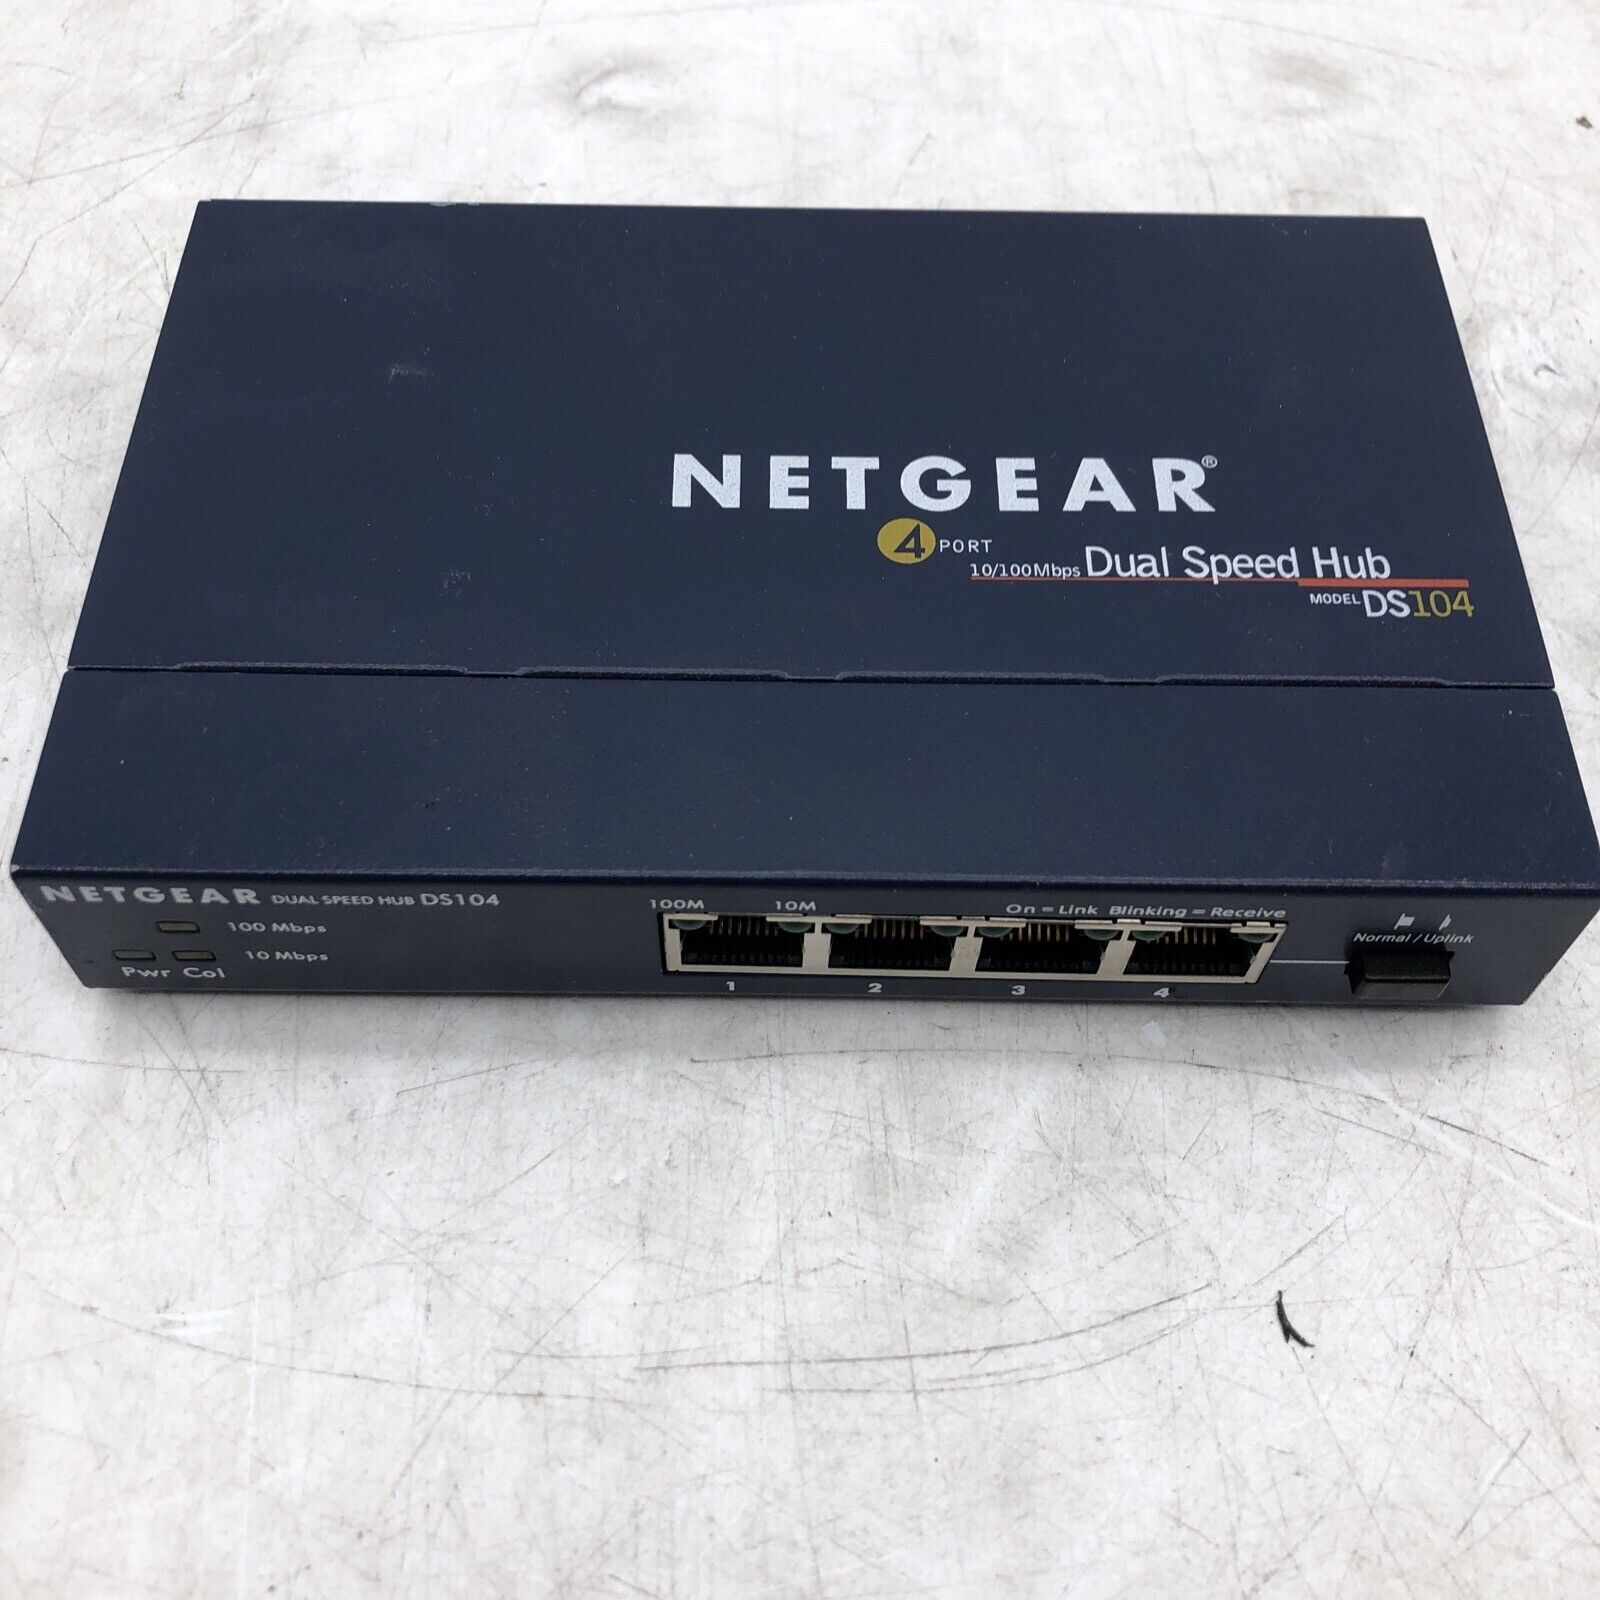 Netgear Dual Speed Hub Model DS104 without Cords 4 Ports TESTED FOR POWER